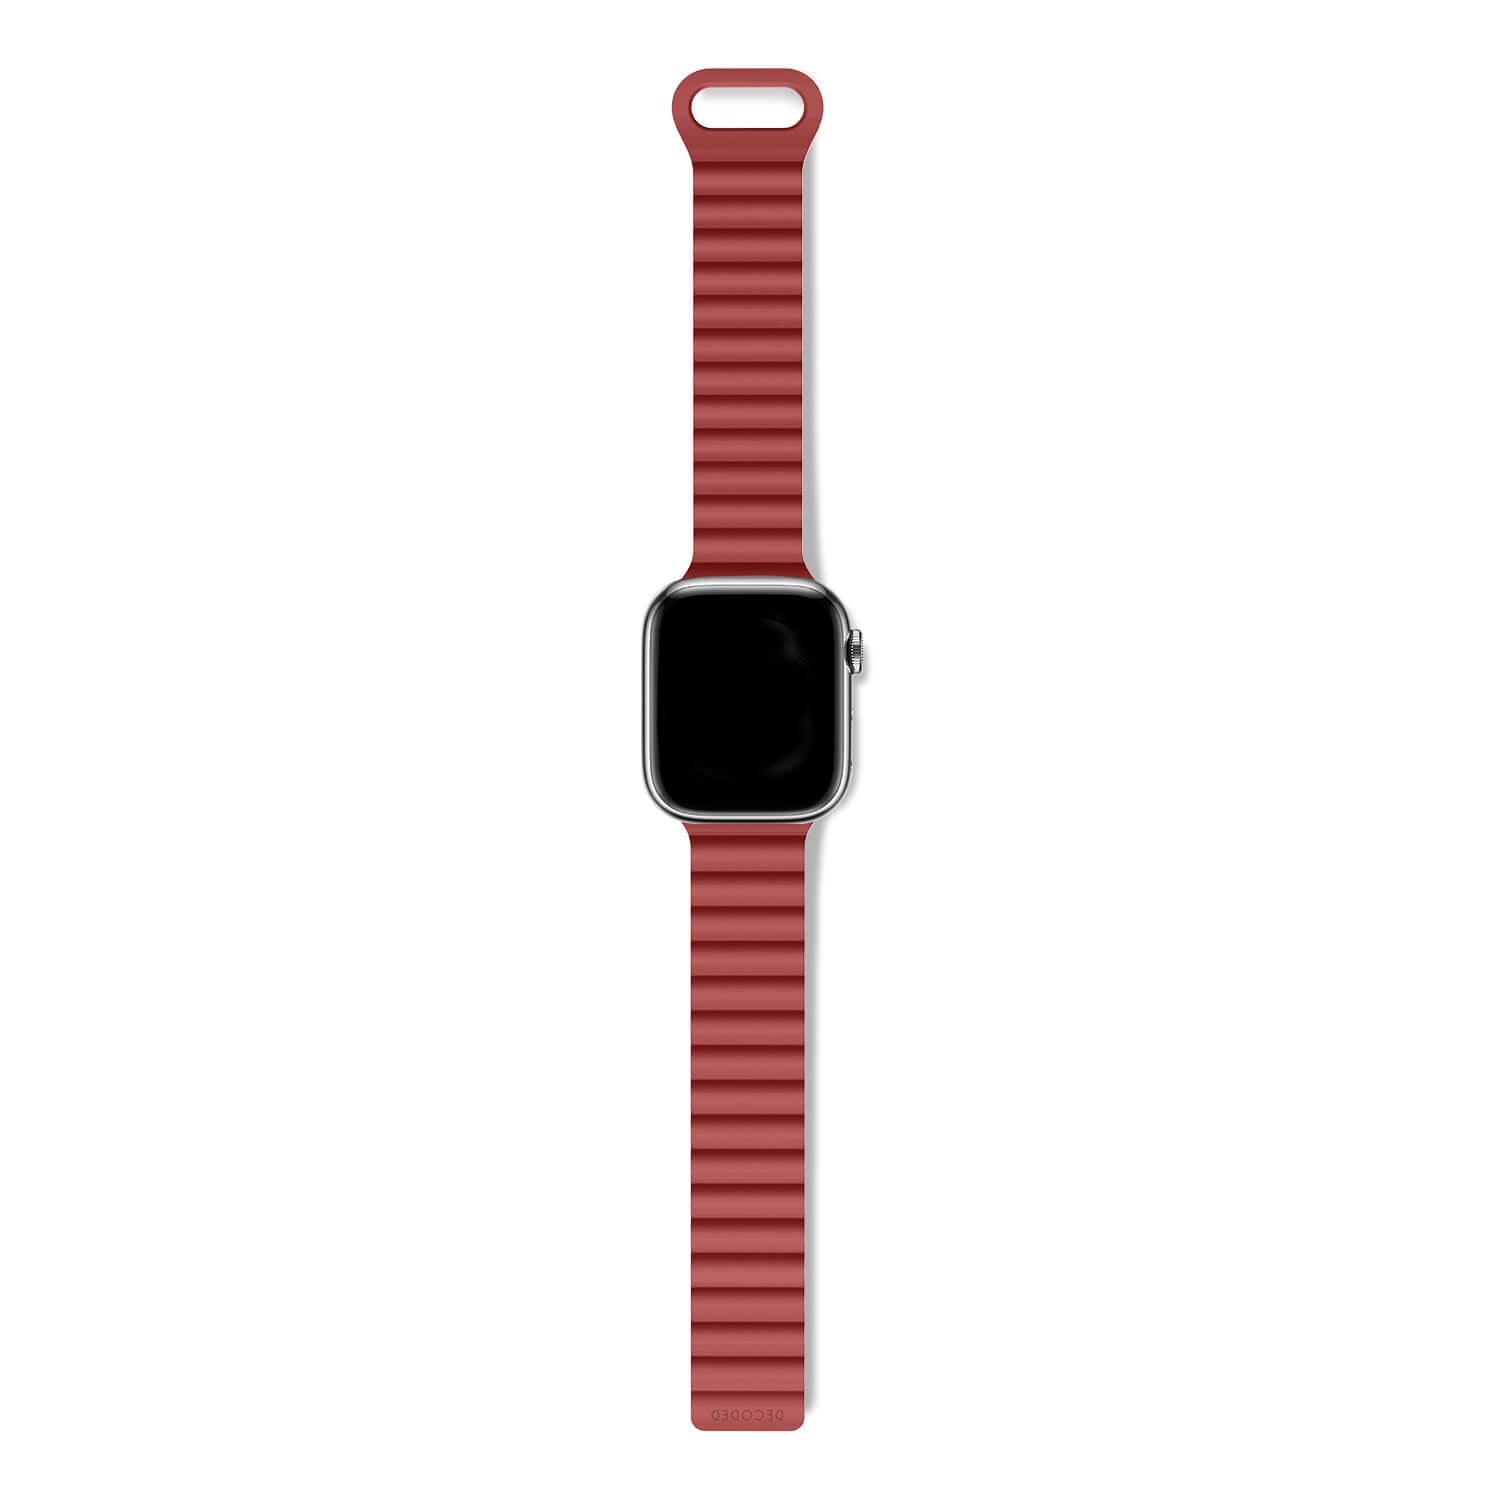 Silicone Traction Loop Strap Apple Watch 40mm, Astro Dust